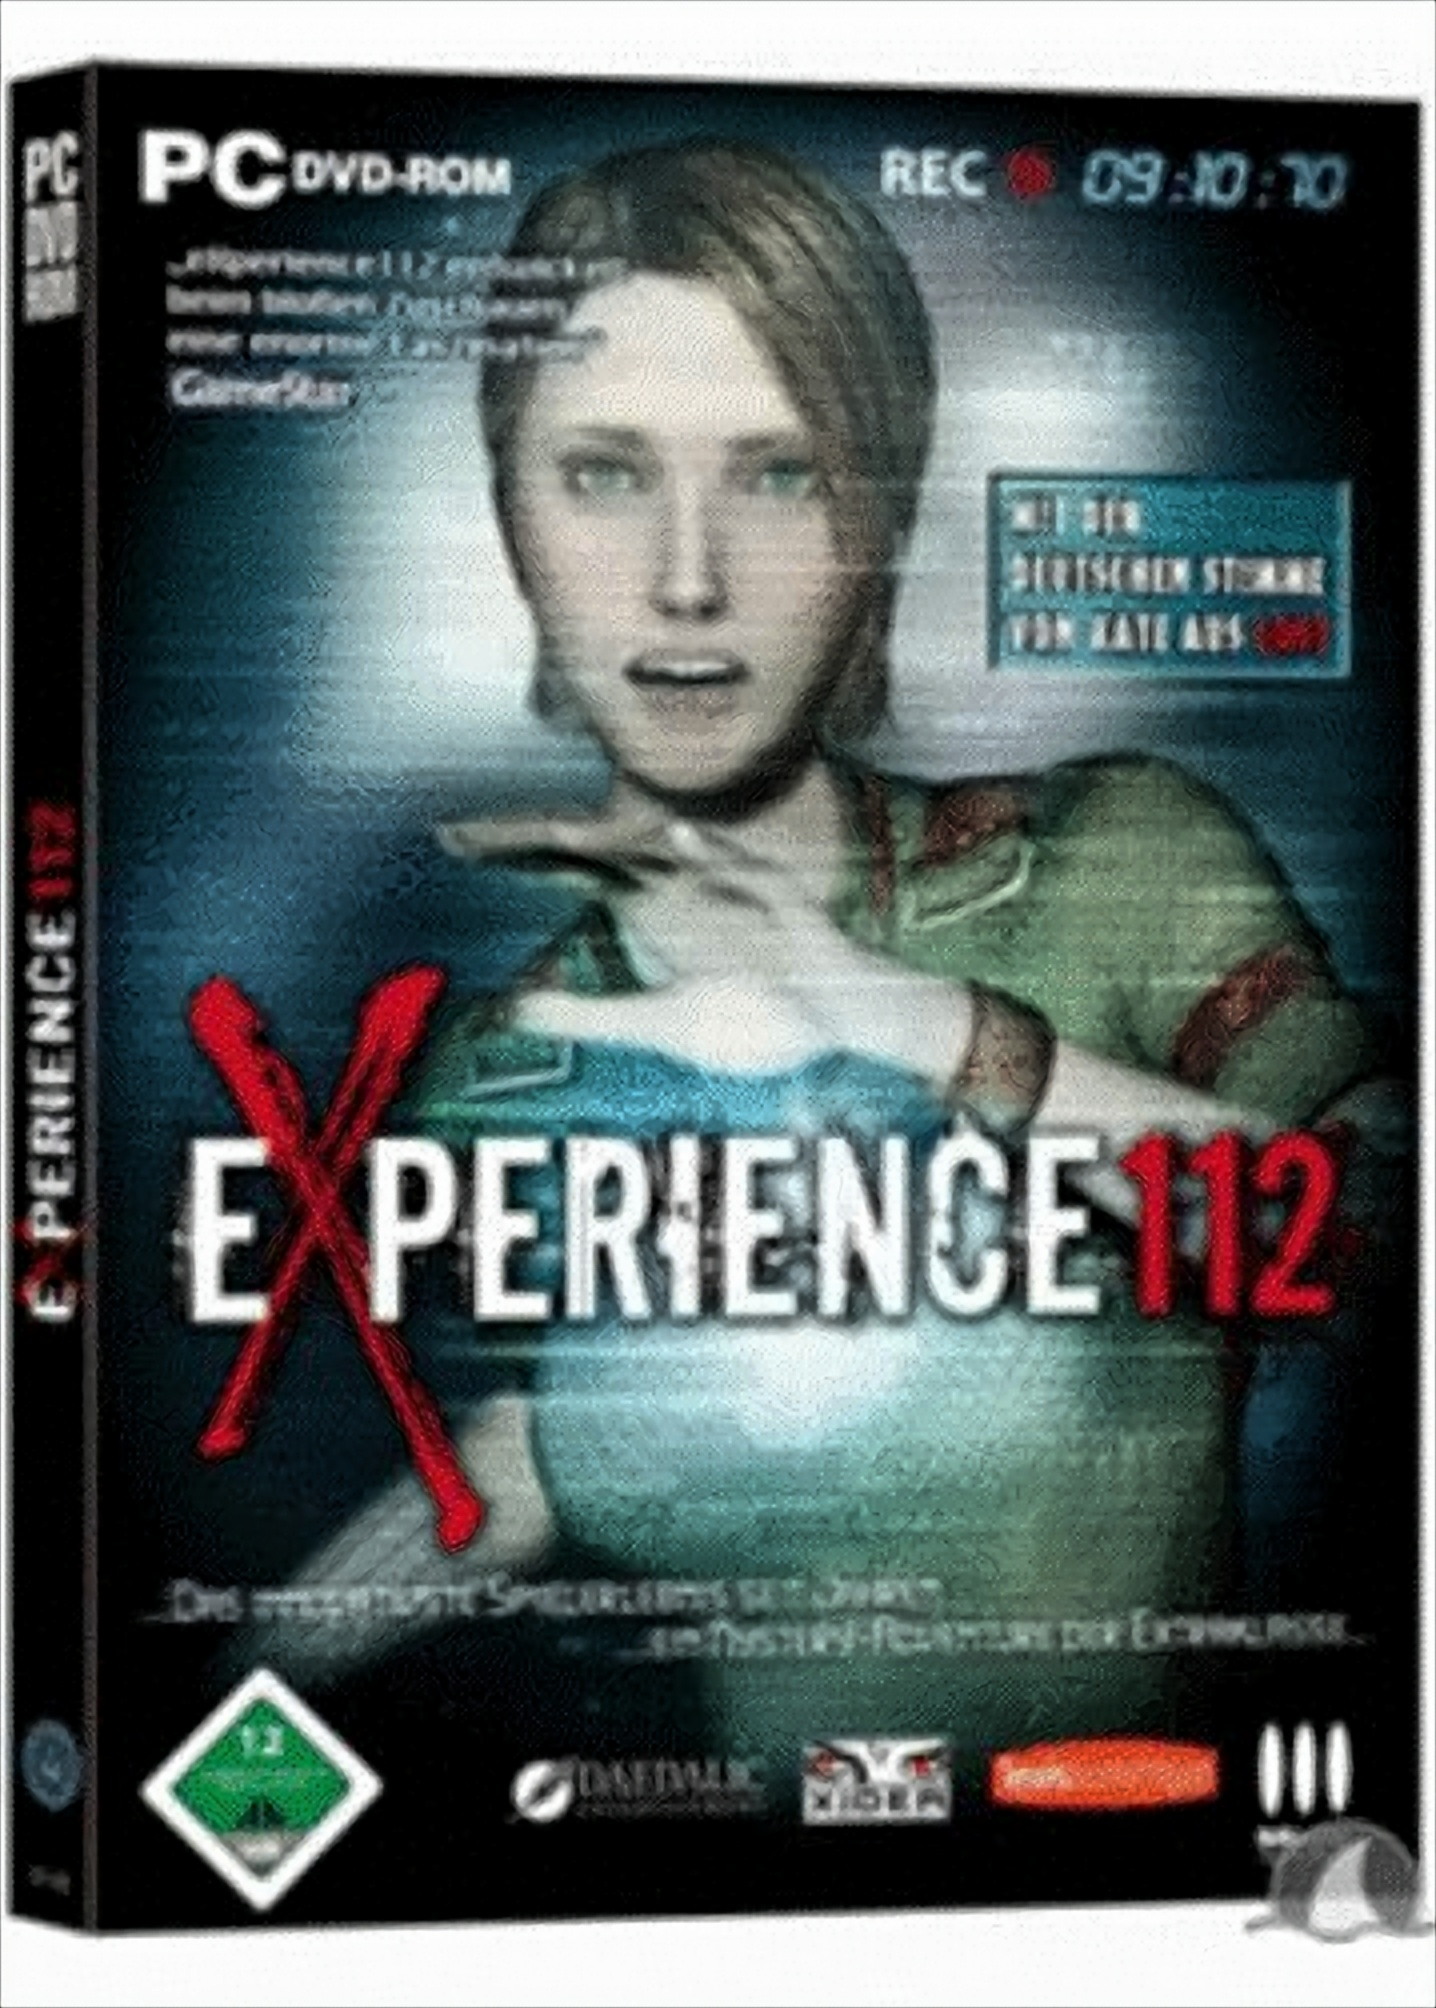 eXperience 112 - [PC